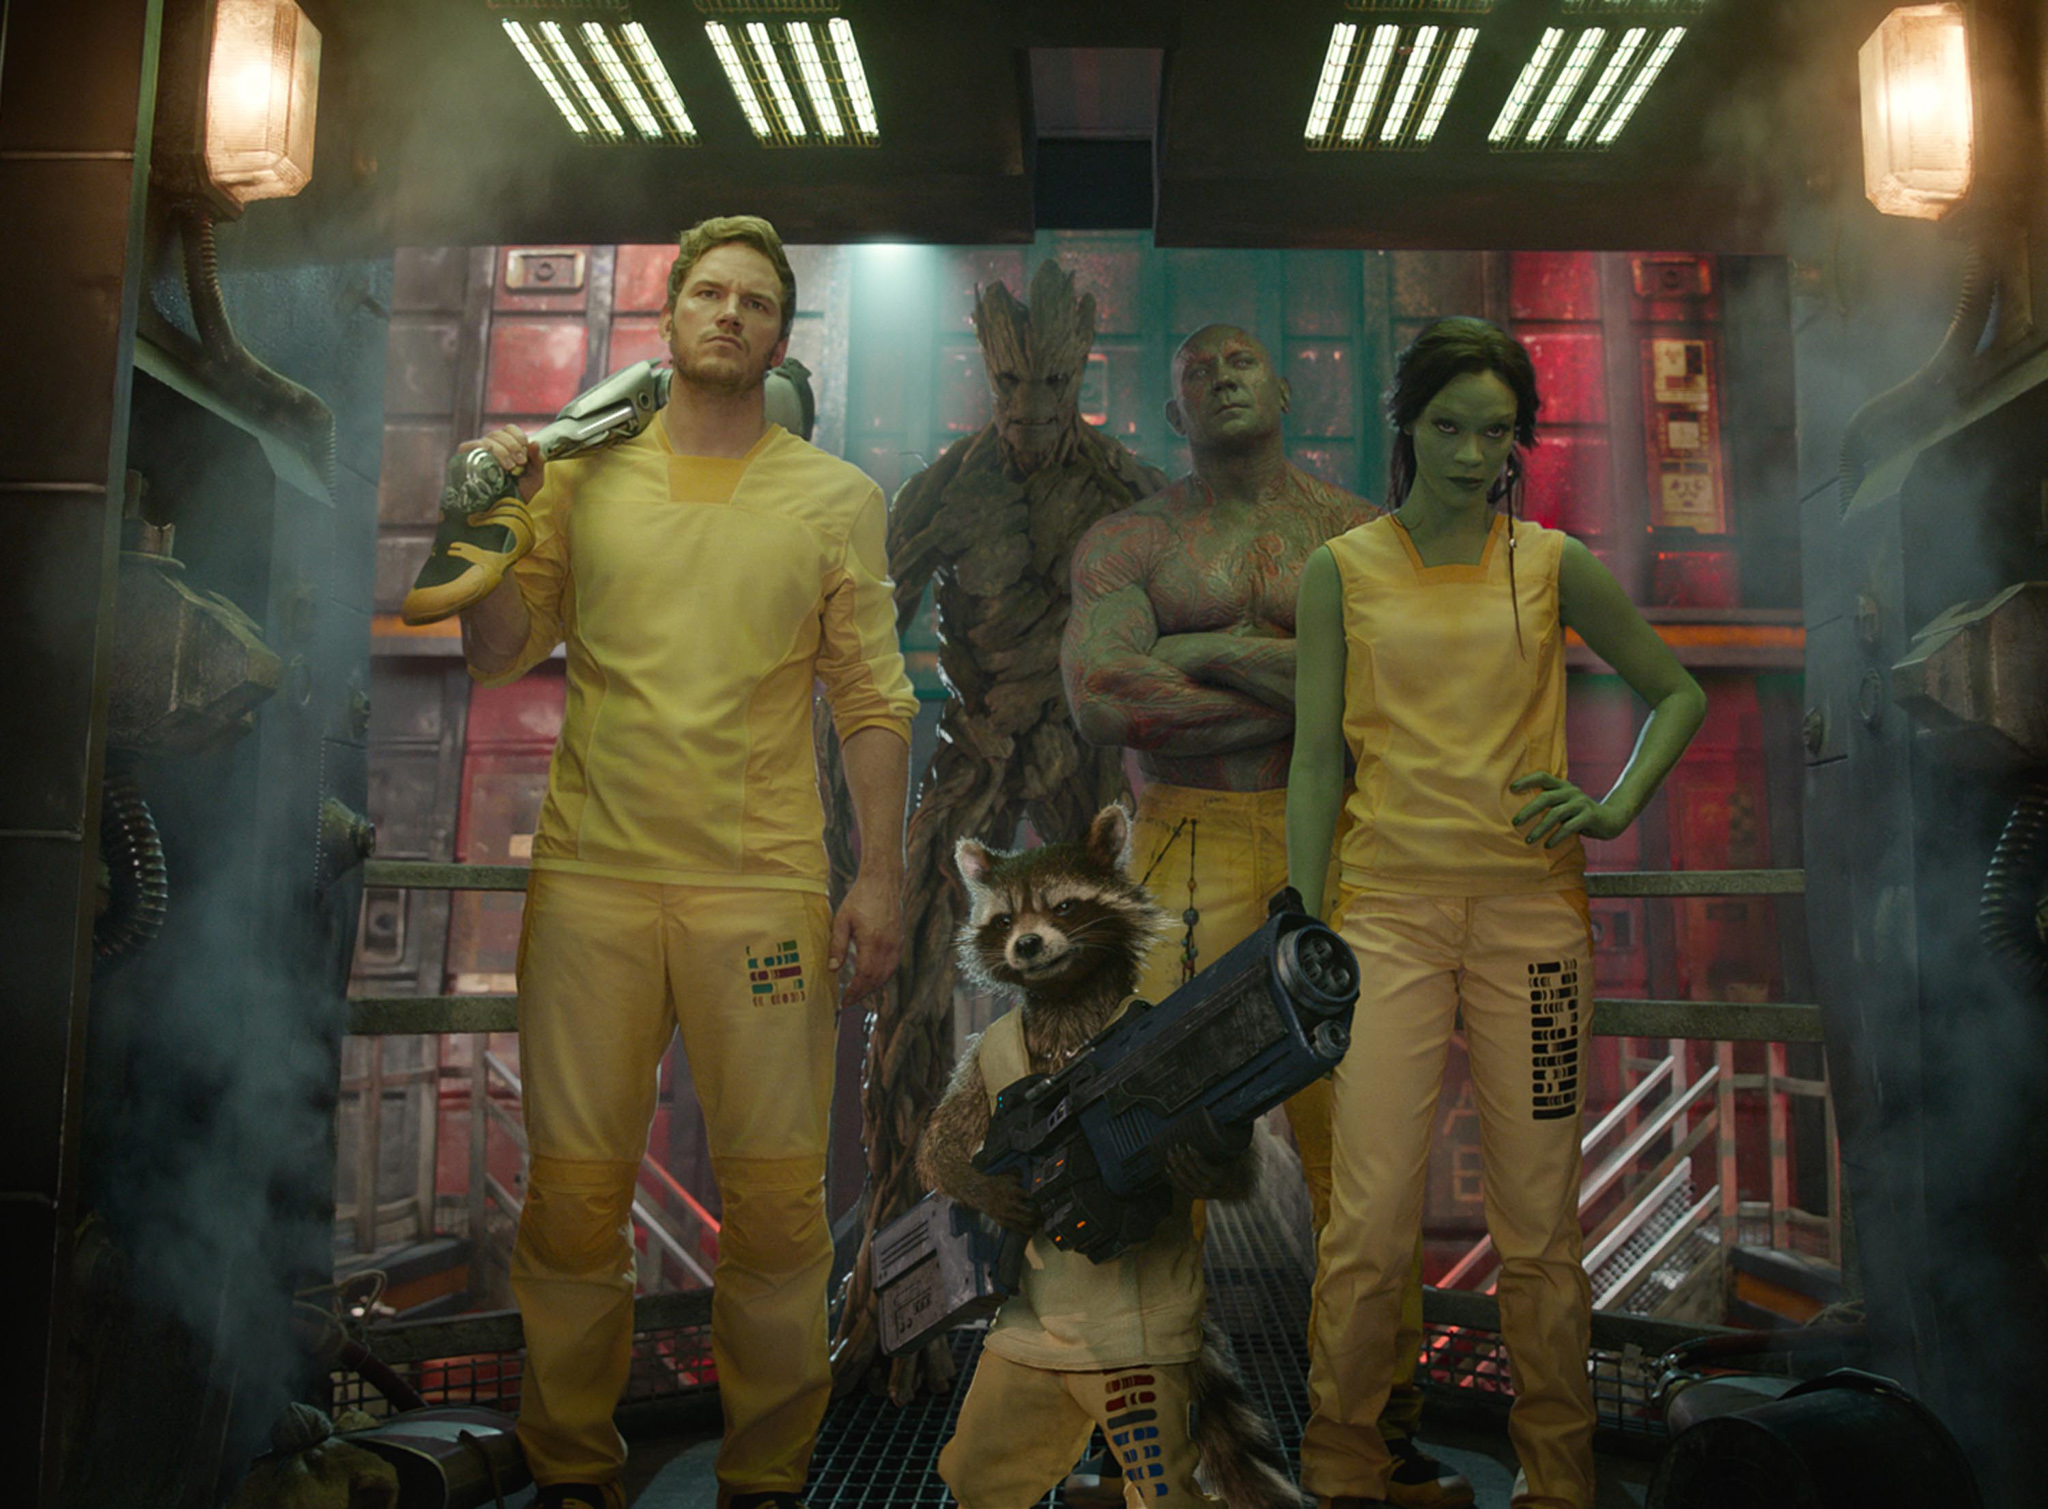 Group shot of the Guardians of the Galaxy team all wearing yellow